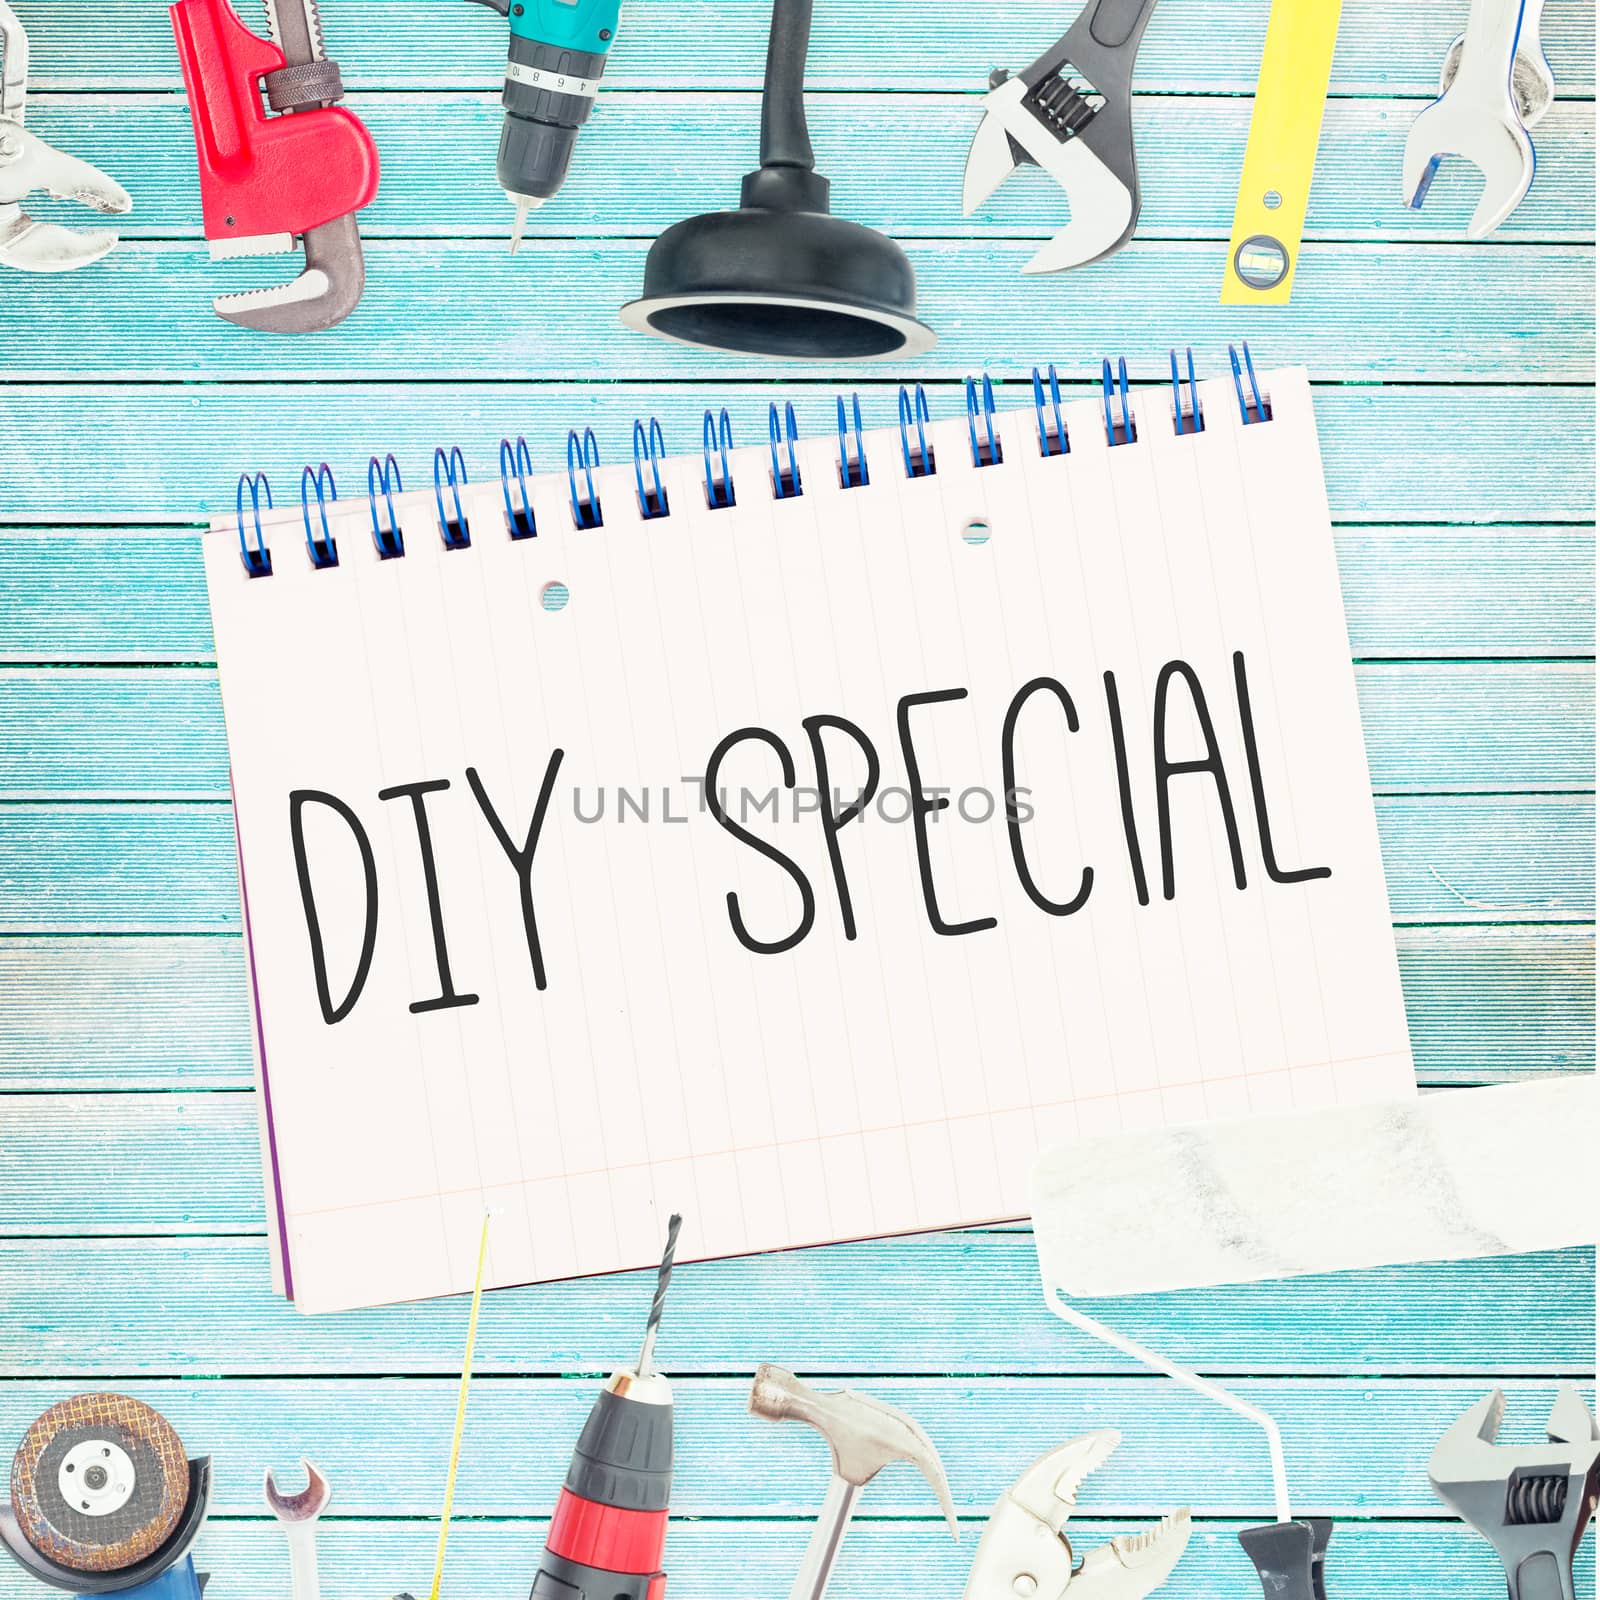 The word diy special against tools and notepad on wooden background